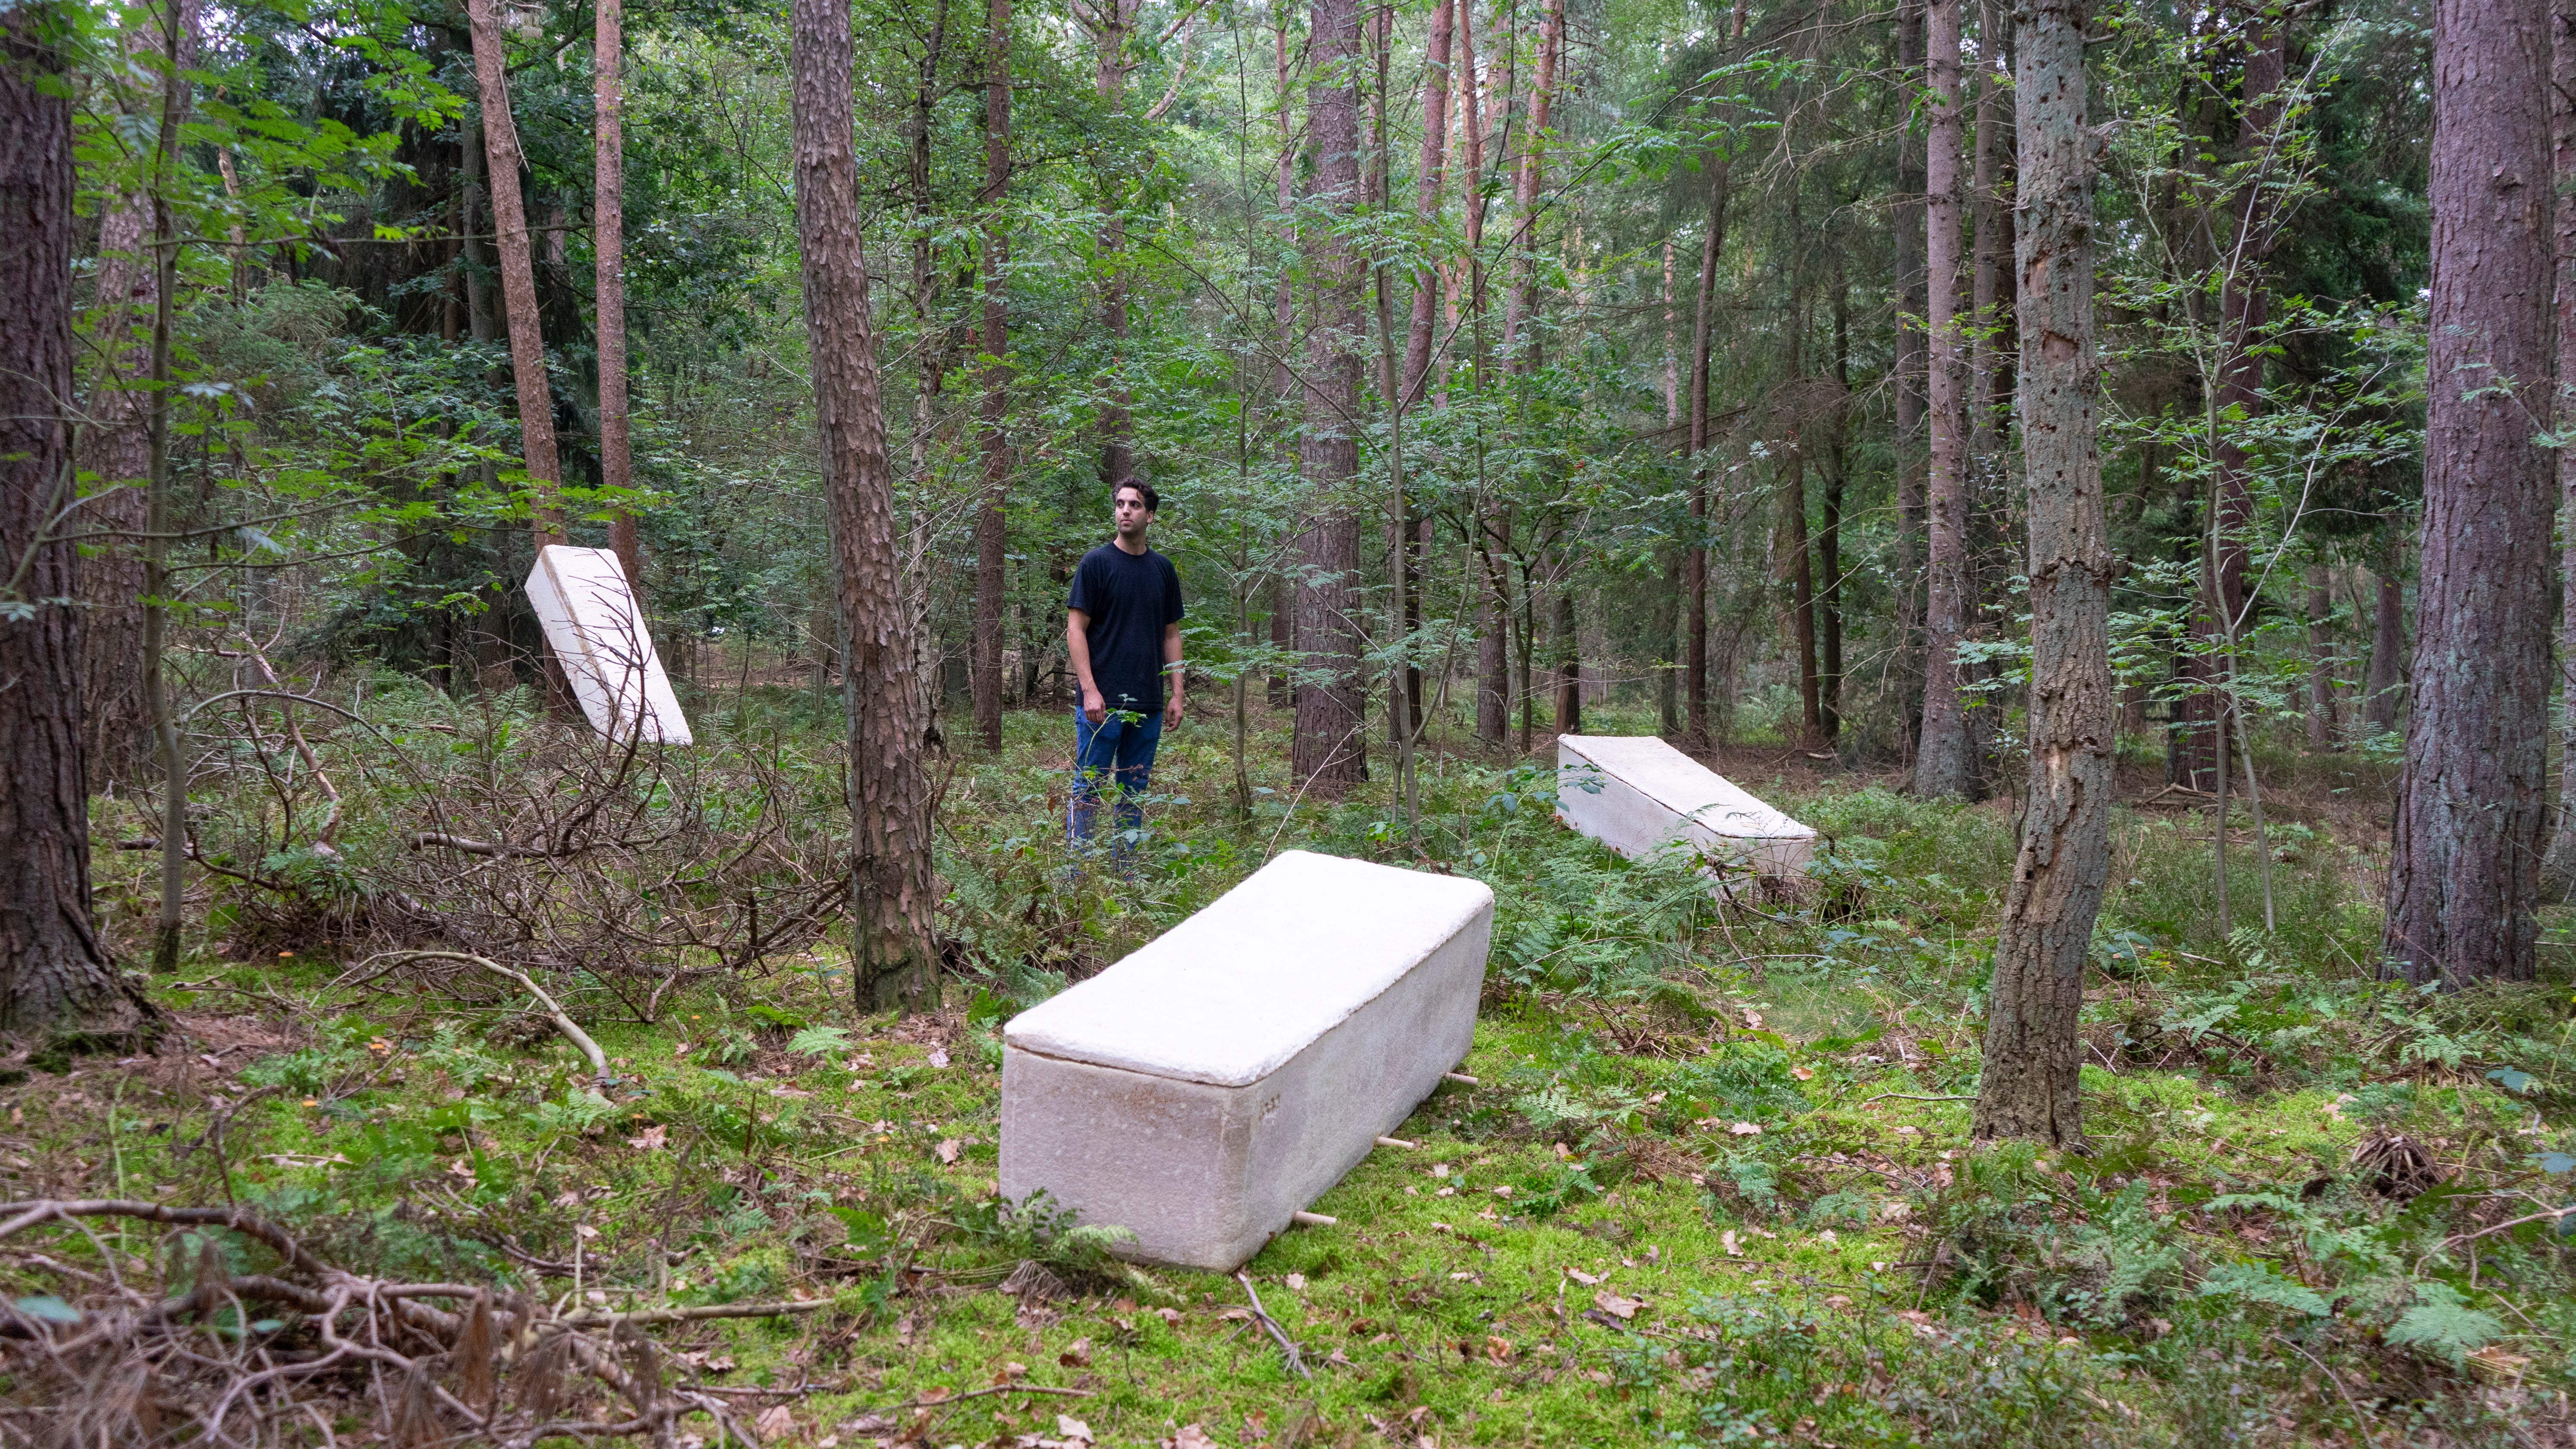 The sustainable coffin is made from the mushroom fibre mycelium